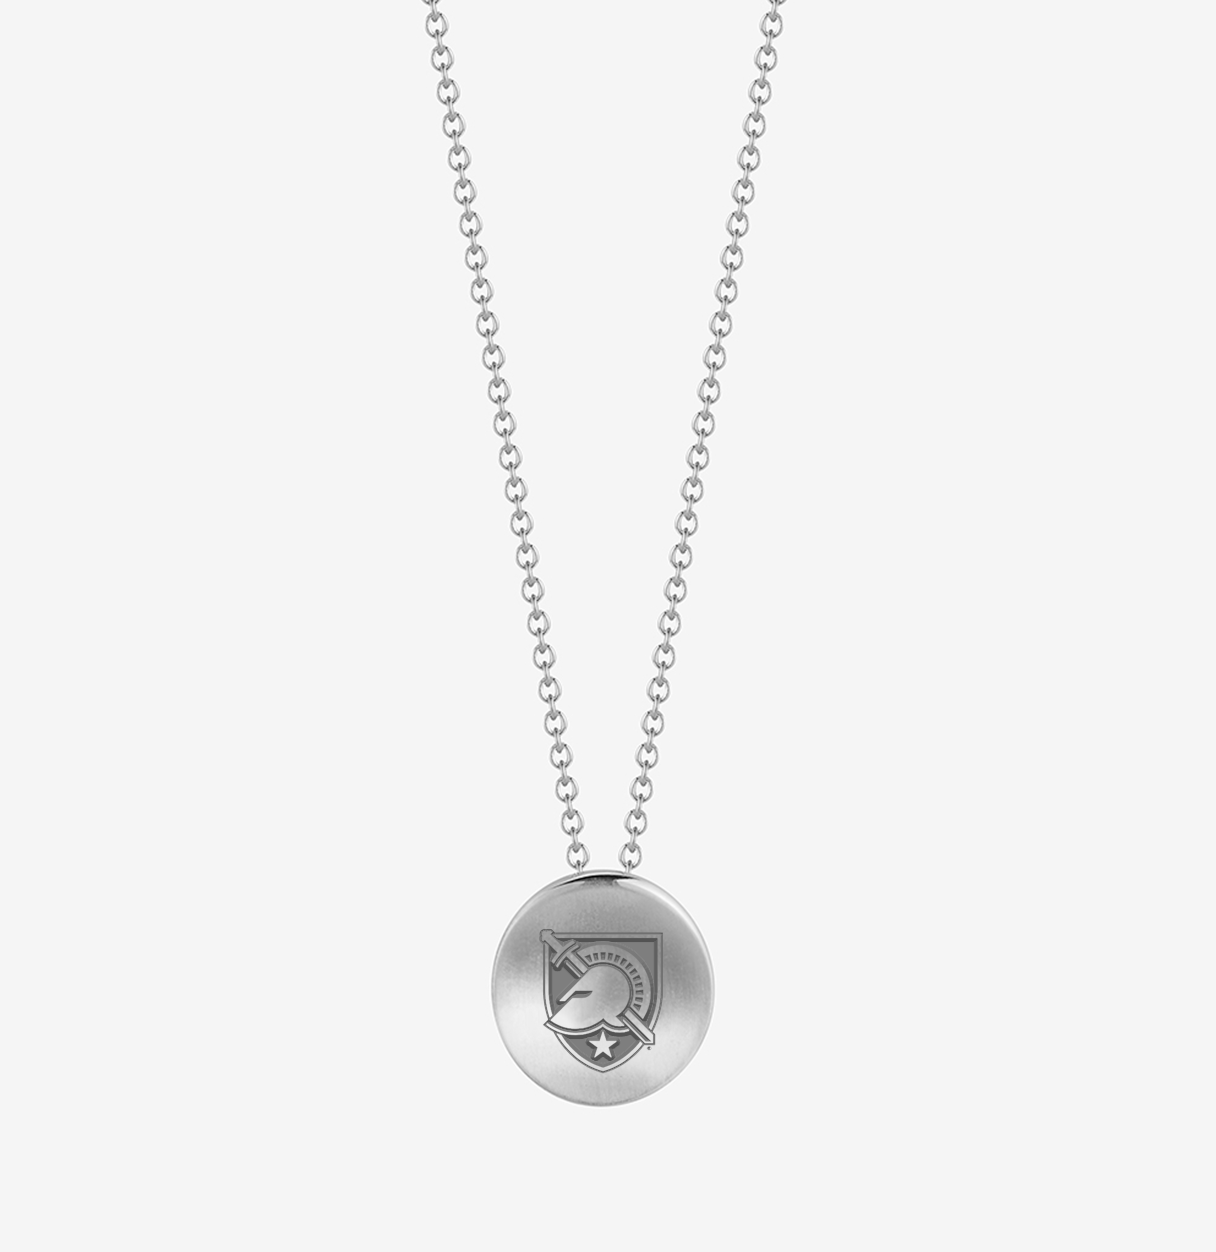 West Point Shield Necklace